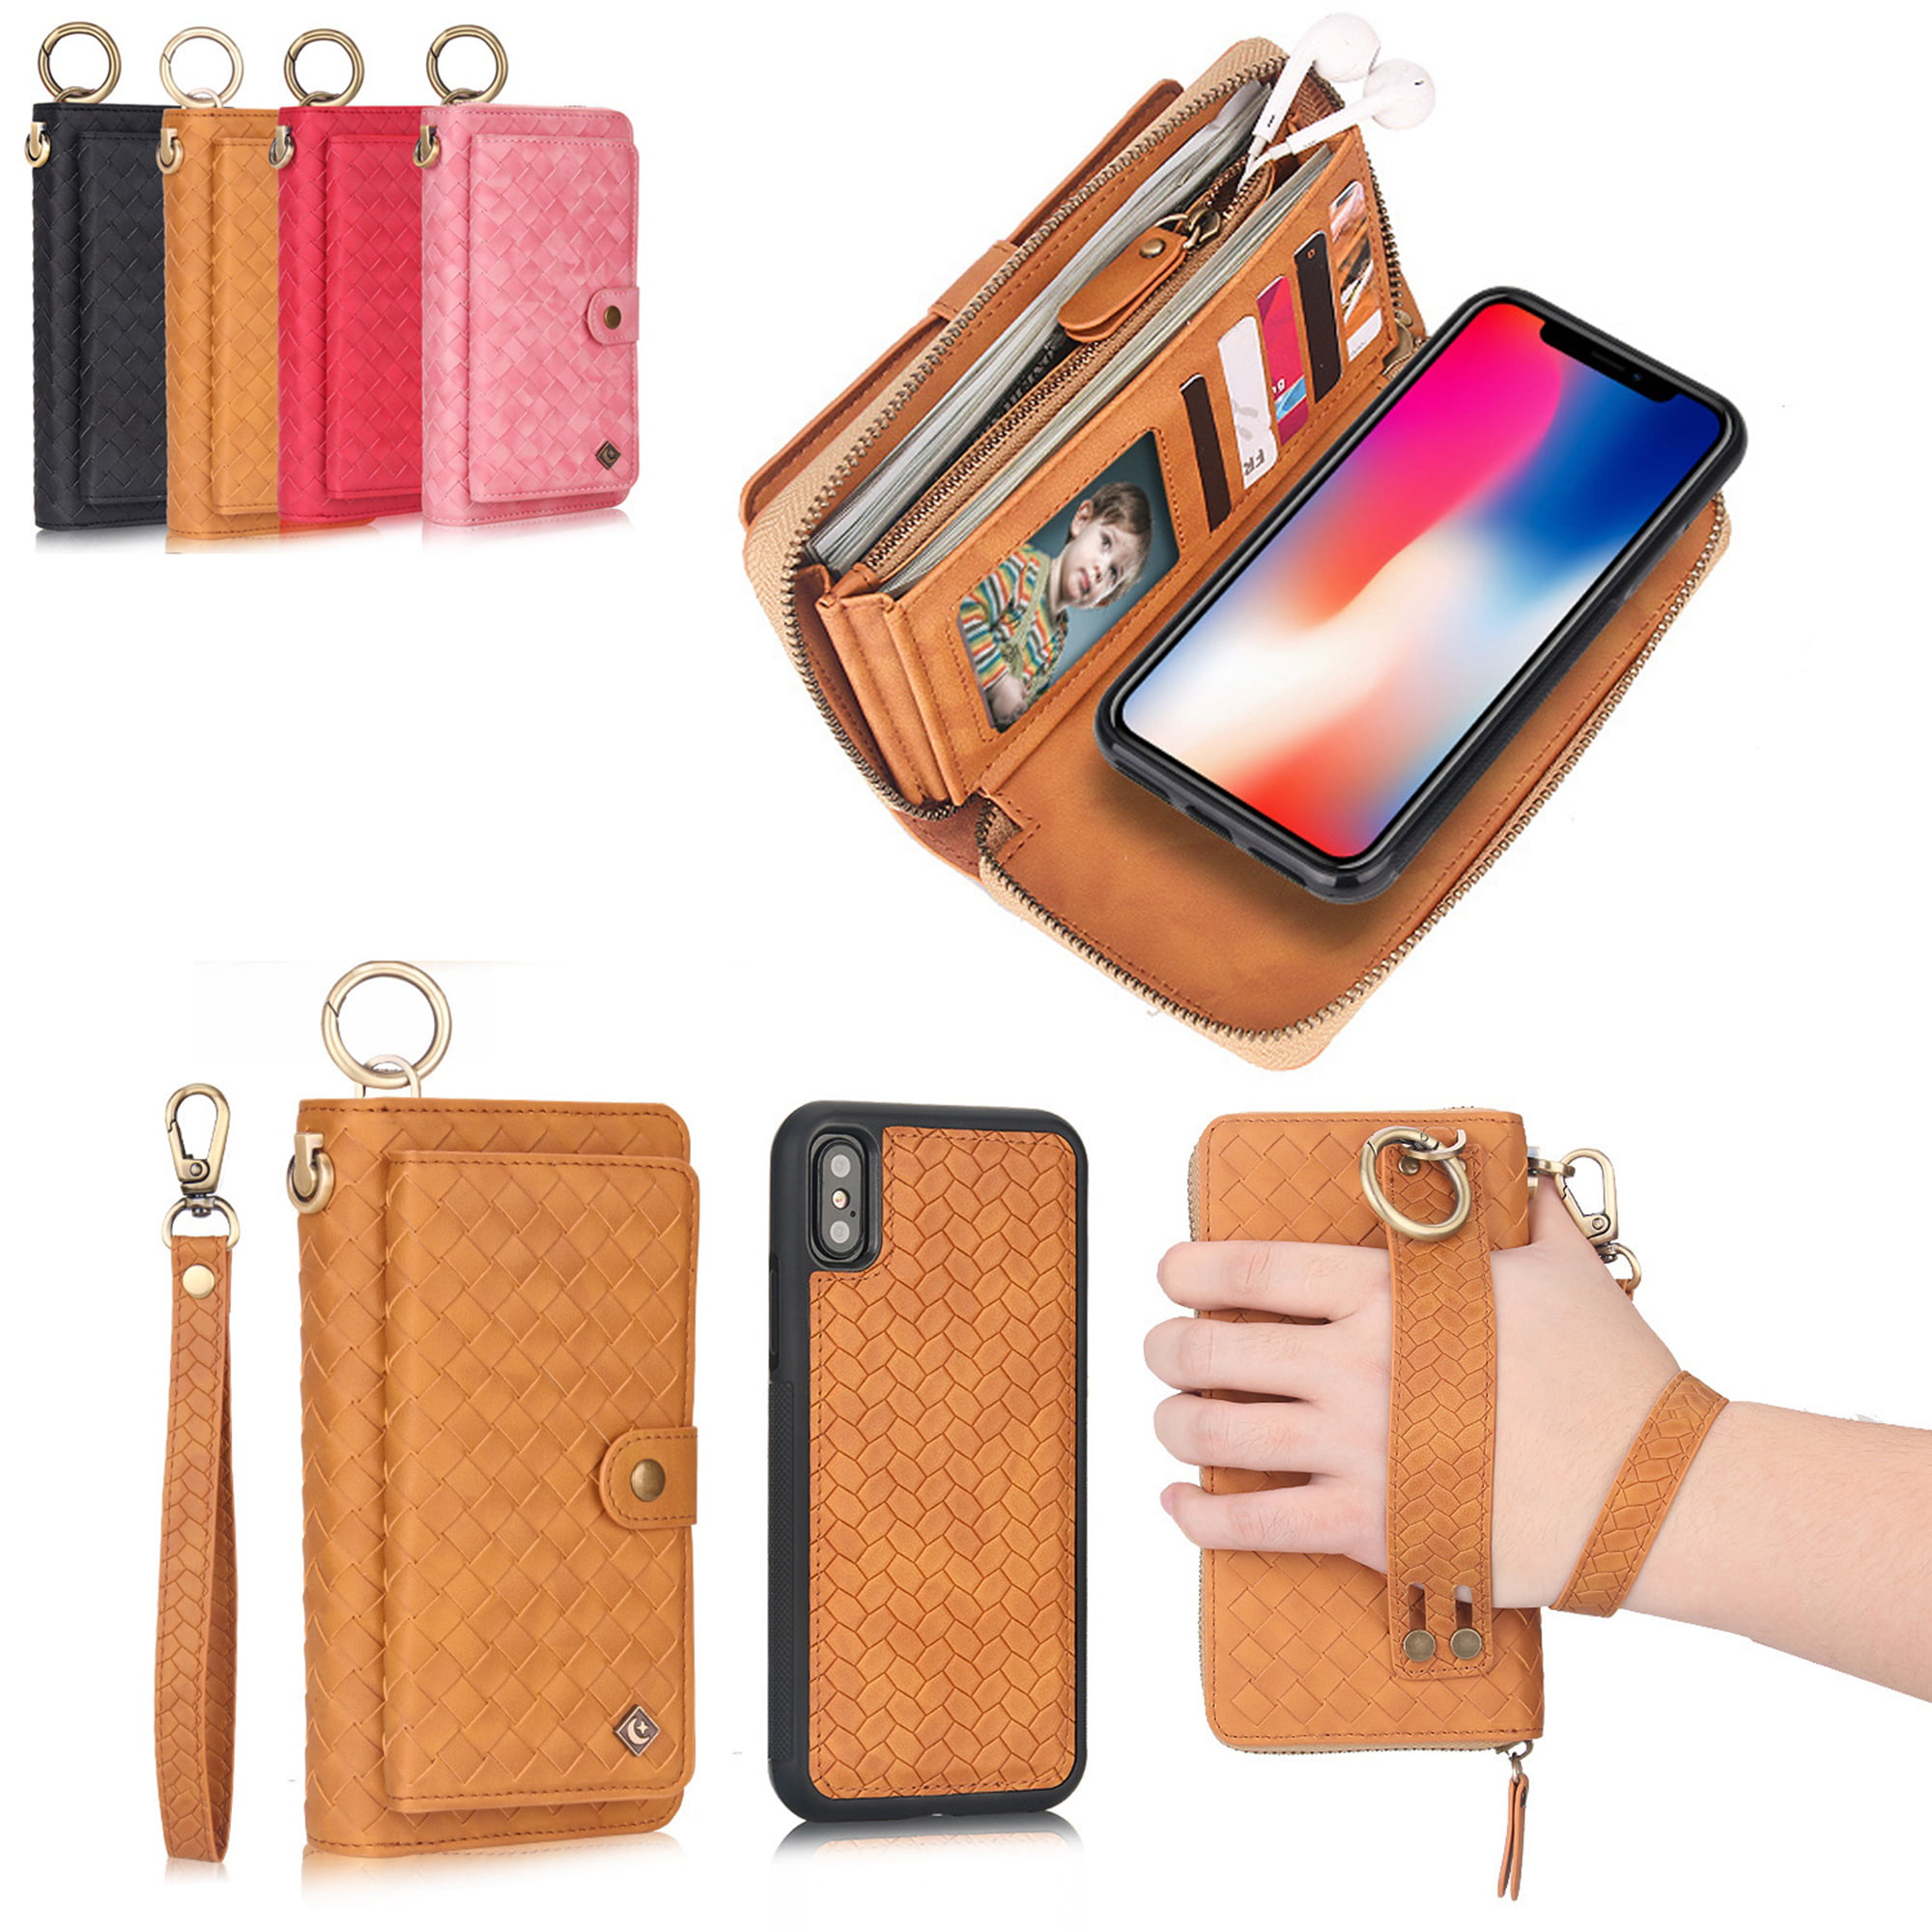 Wallet Case Compatible with iPhone Xs Max LAMEEKU Crossbody Wallet Case Card Holder Case Quilted Handbag Case for Women Protective Case for iPhone Xs Max,6.5-Burgundy Red